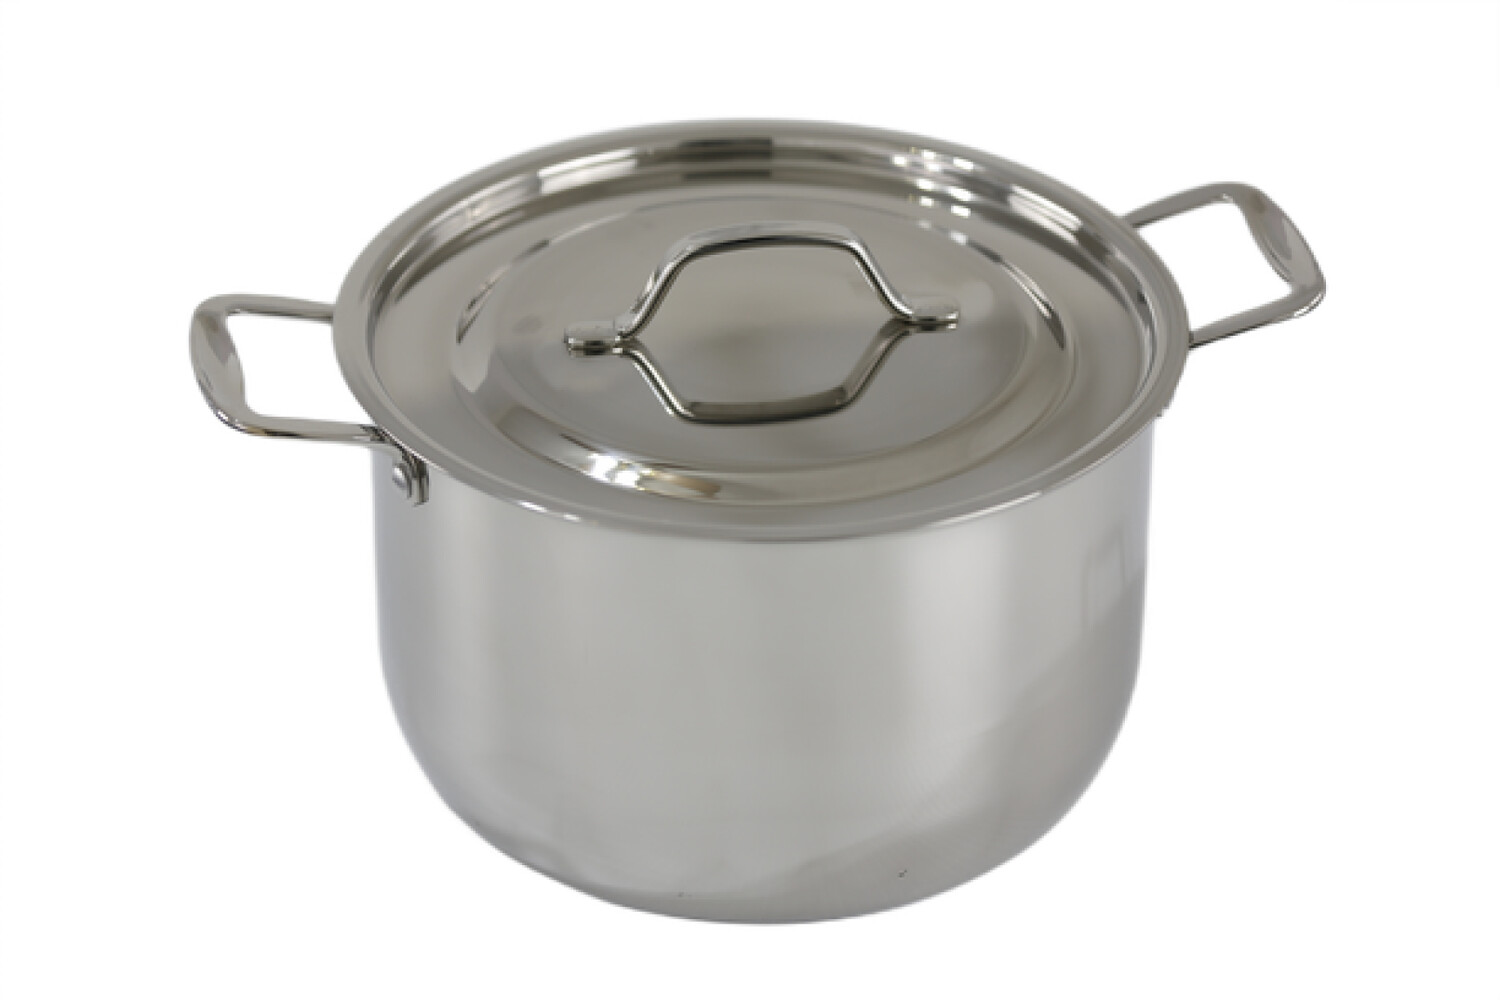 Stainless Steel tri-ply bottom induction Sauce Pot with cover